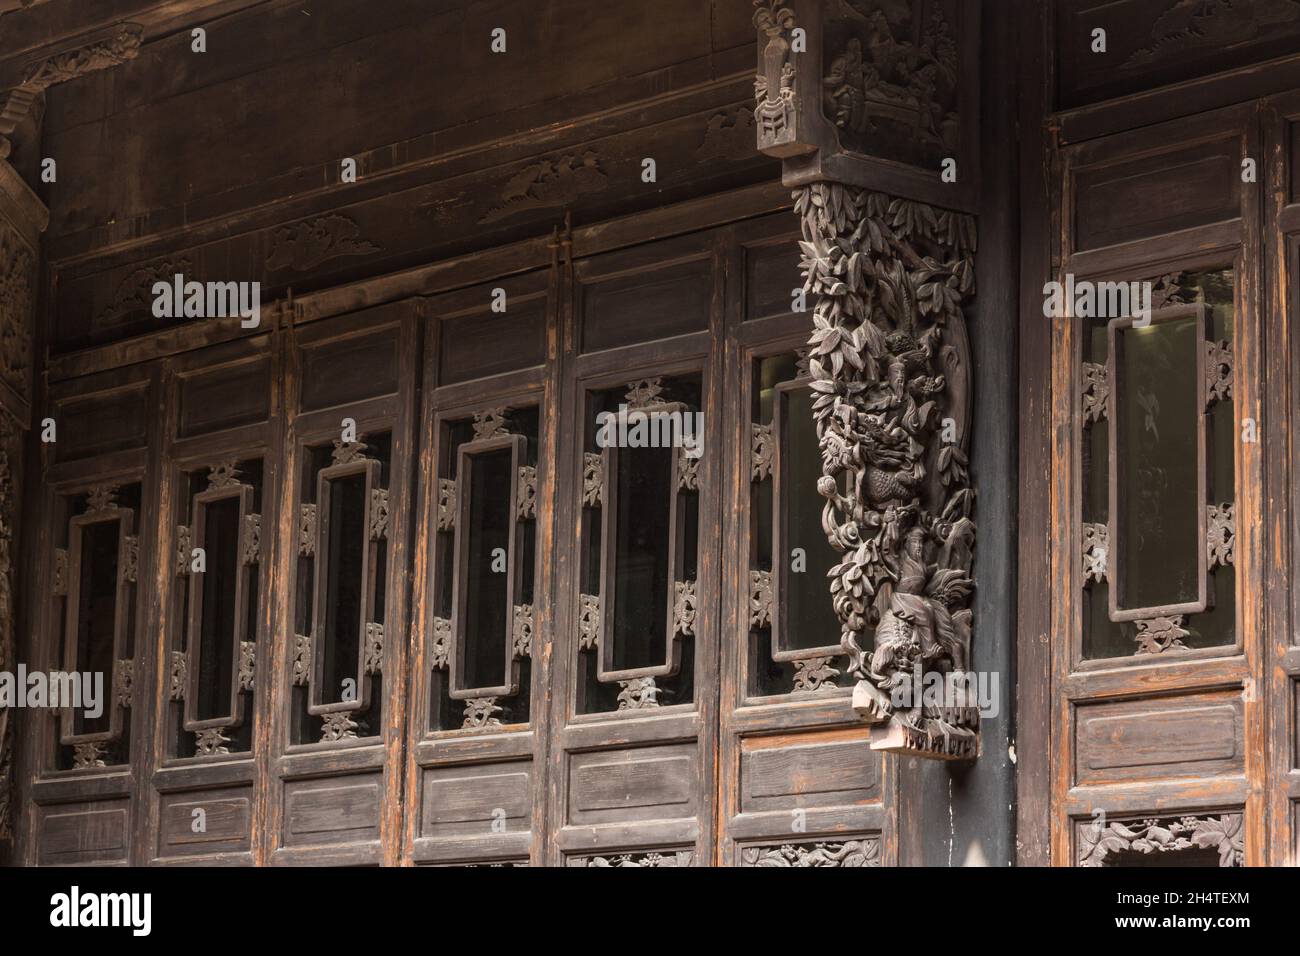 Elaborate wood carving of a peacock & people in tradtional dress on an old building in Wuzhen, China. Stock Photo